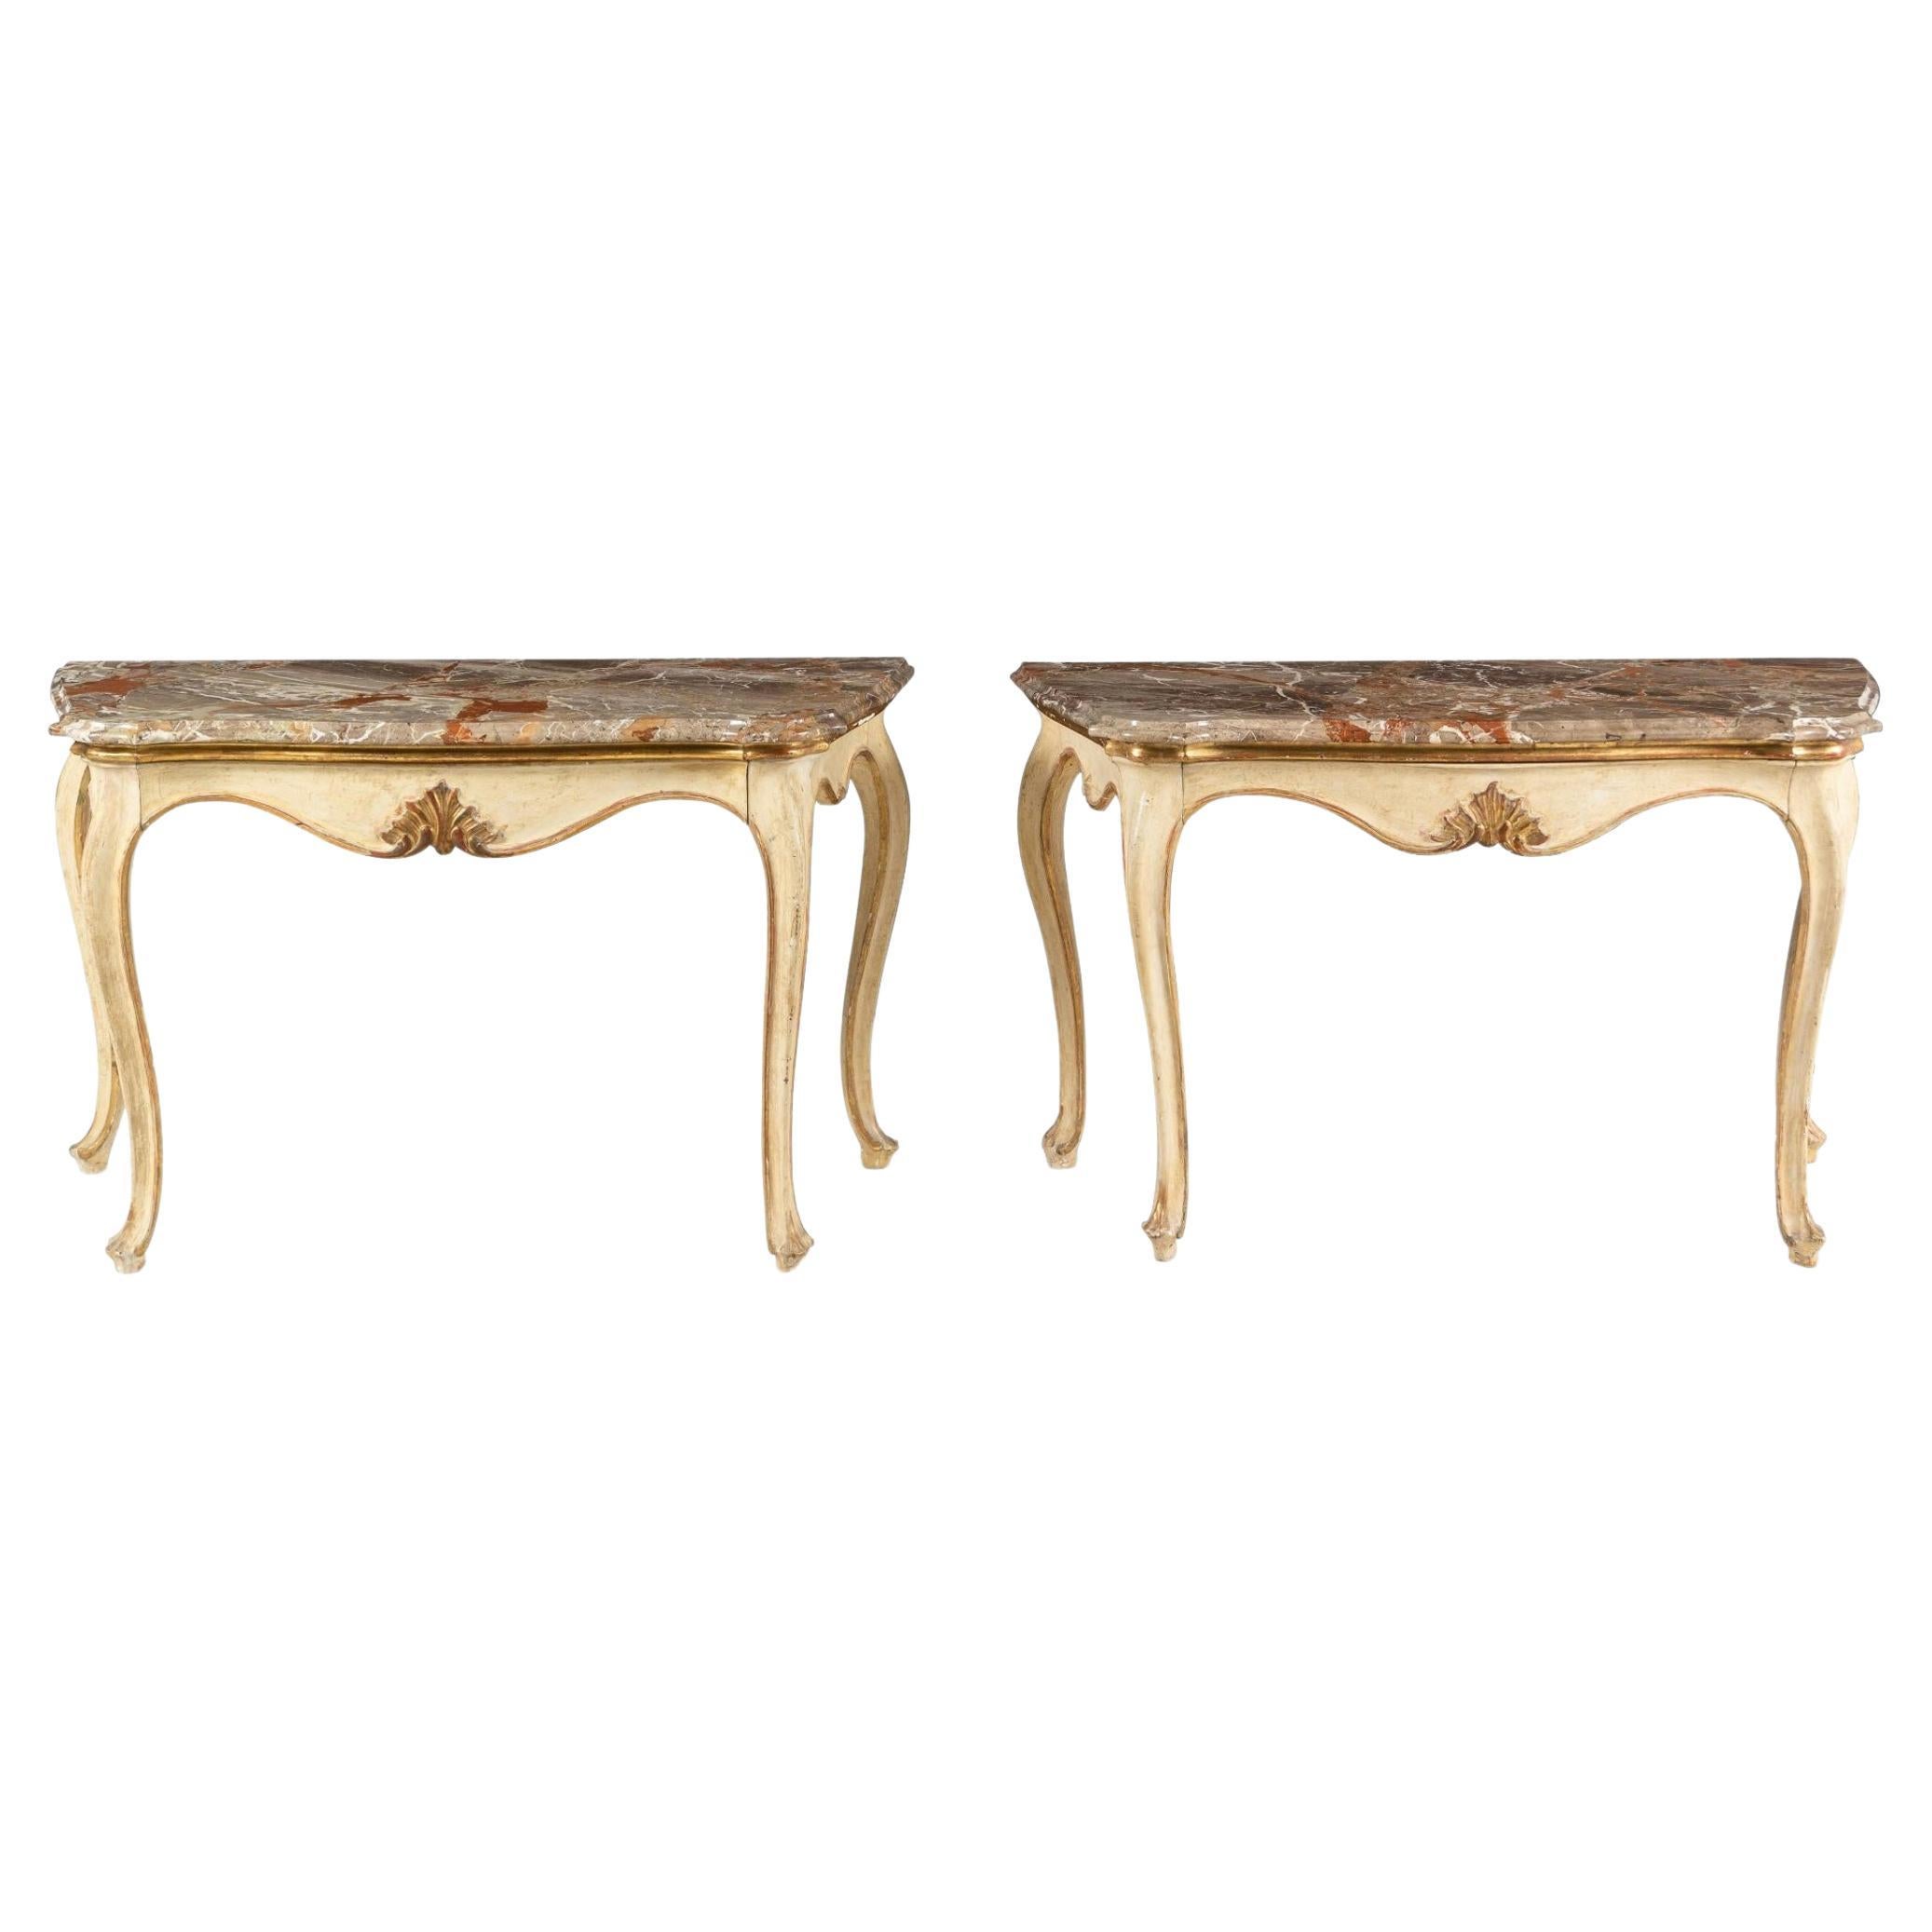 Pair of 19th Century Italian Painted and Gilt Marble-Top Console Tables For Sale